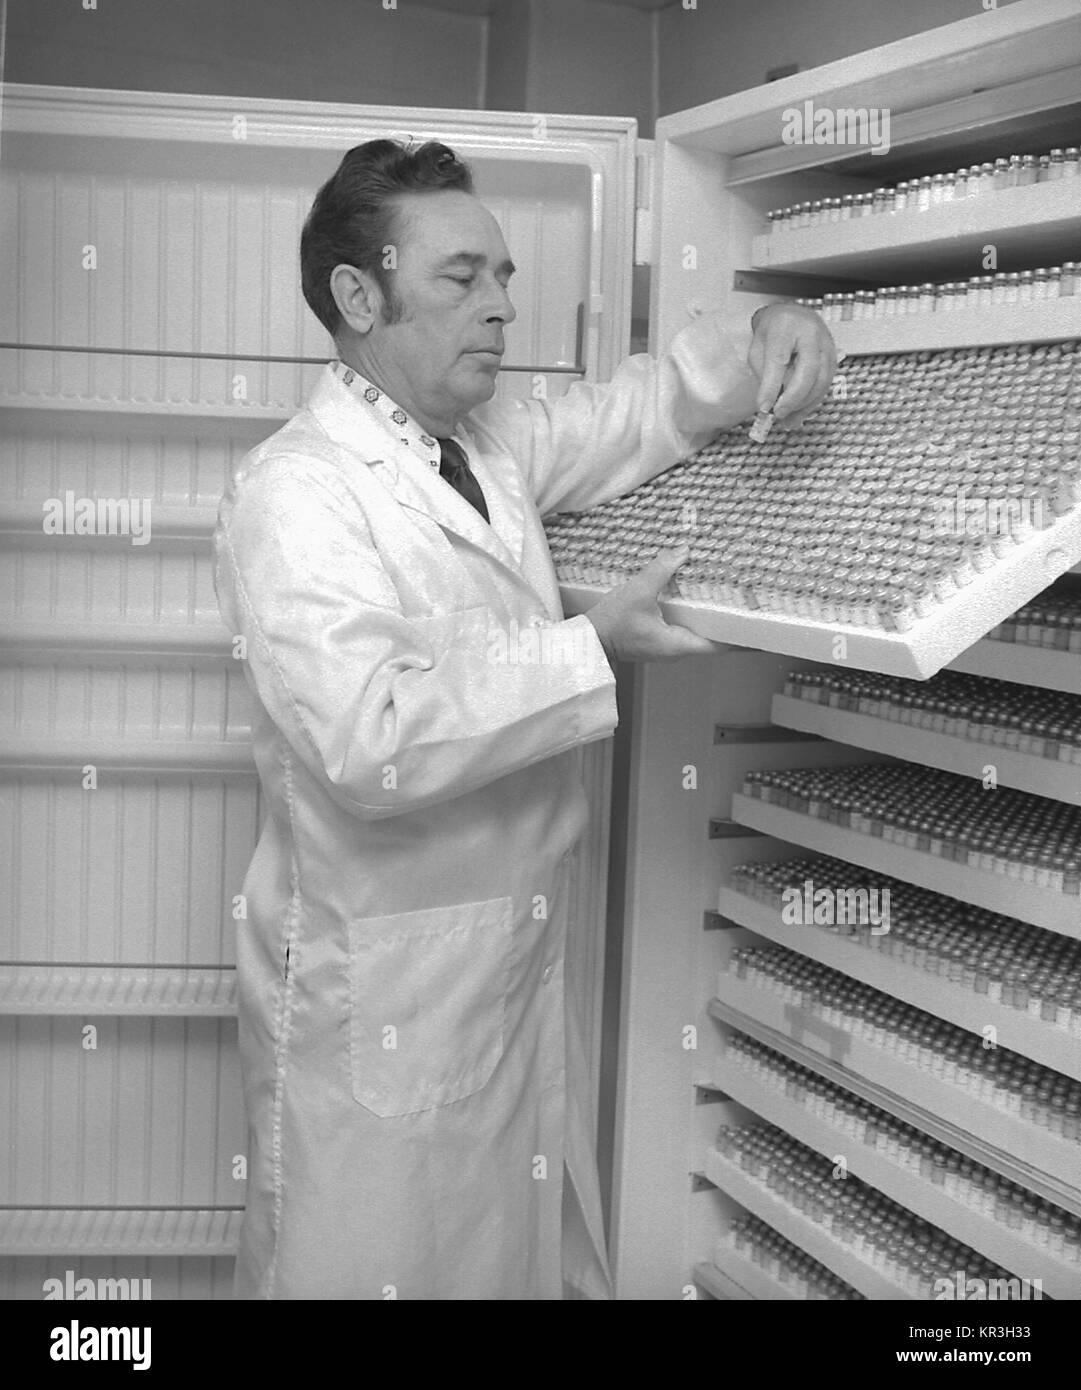 Lab technician Chuck Peters examines the labels on stored serum vials, 1977. Vials of serum hold information about nutrition, health, disease patterns and life styles, 1977. Image courtesy CDC/K. Lord. Stock Photo